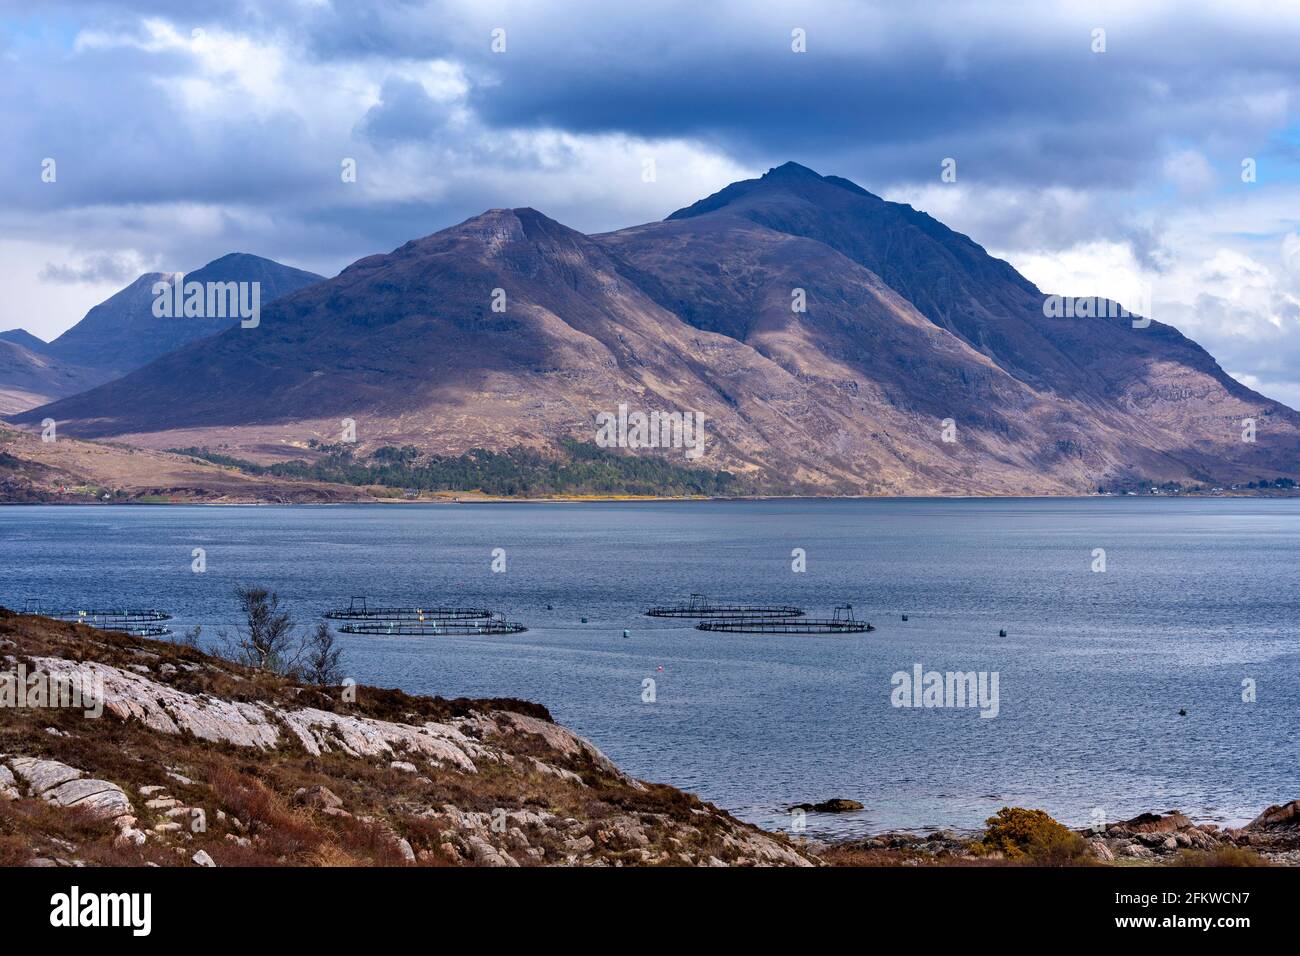 SHIELDAIG WESTER ROSS HIGHLANDS SCOTLAND MOUNTAINS AND SALMON FARM FISH CAGES IN UPPER LOCH TORRIDON Stock Photo